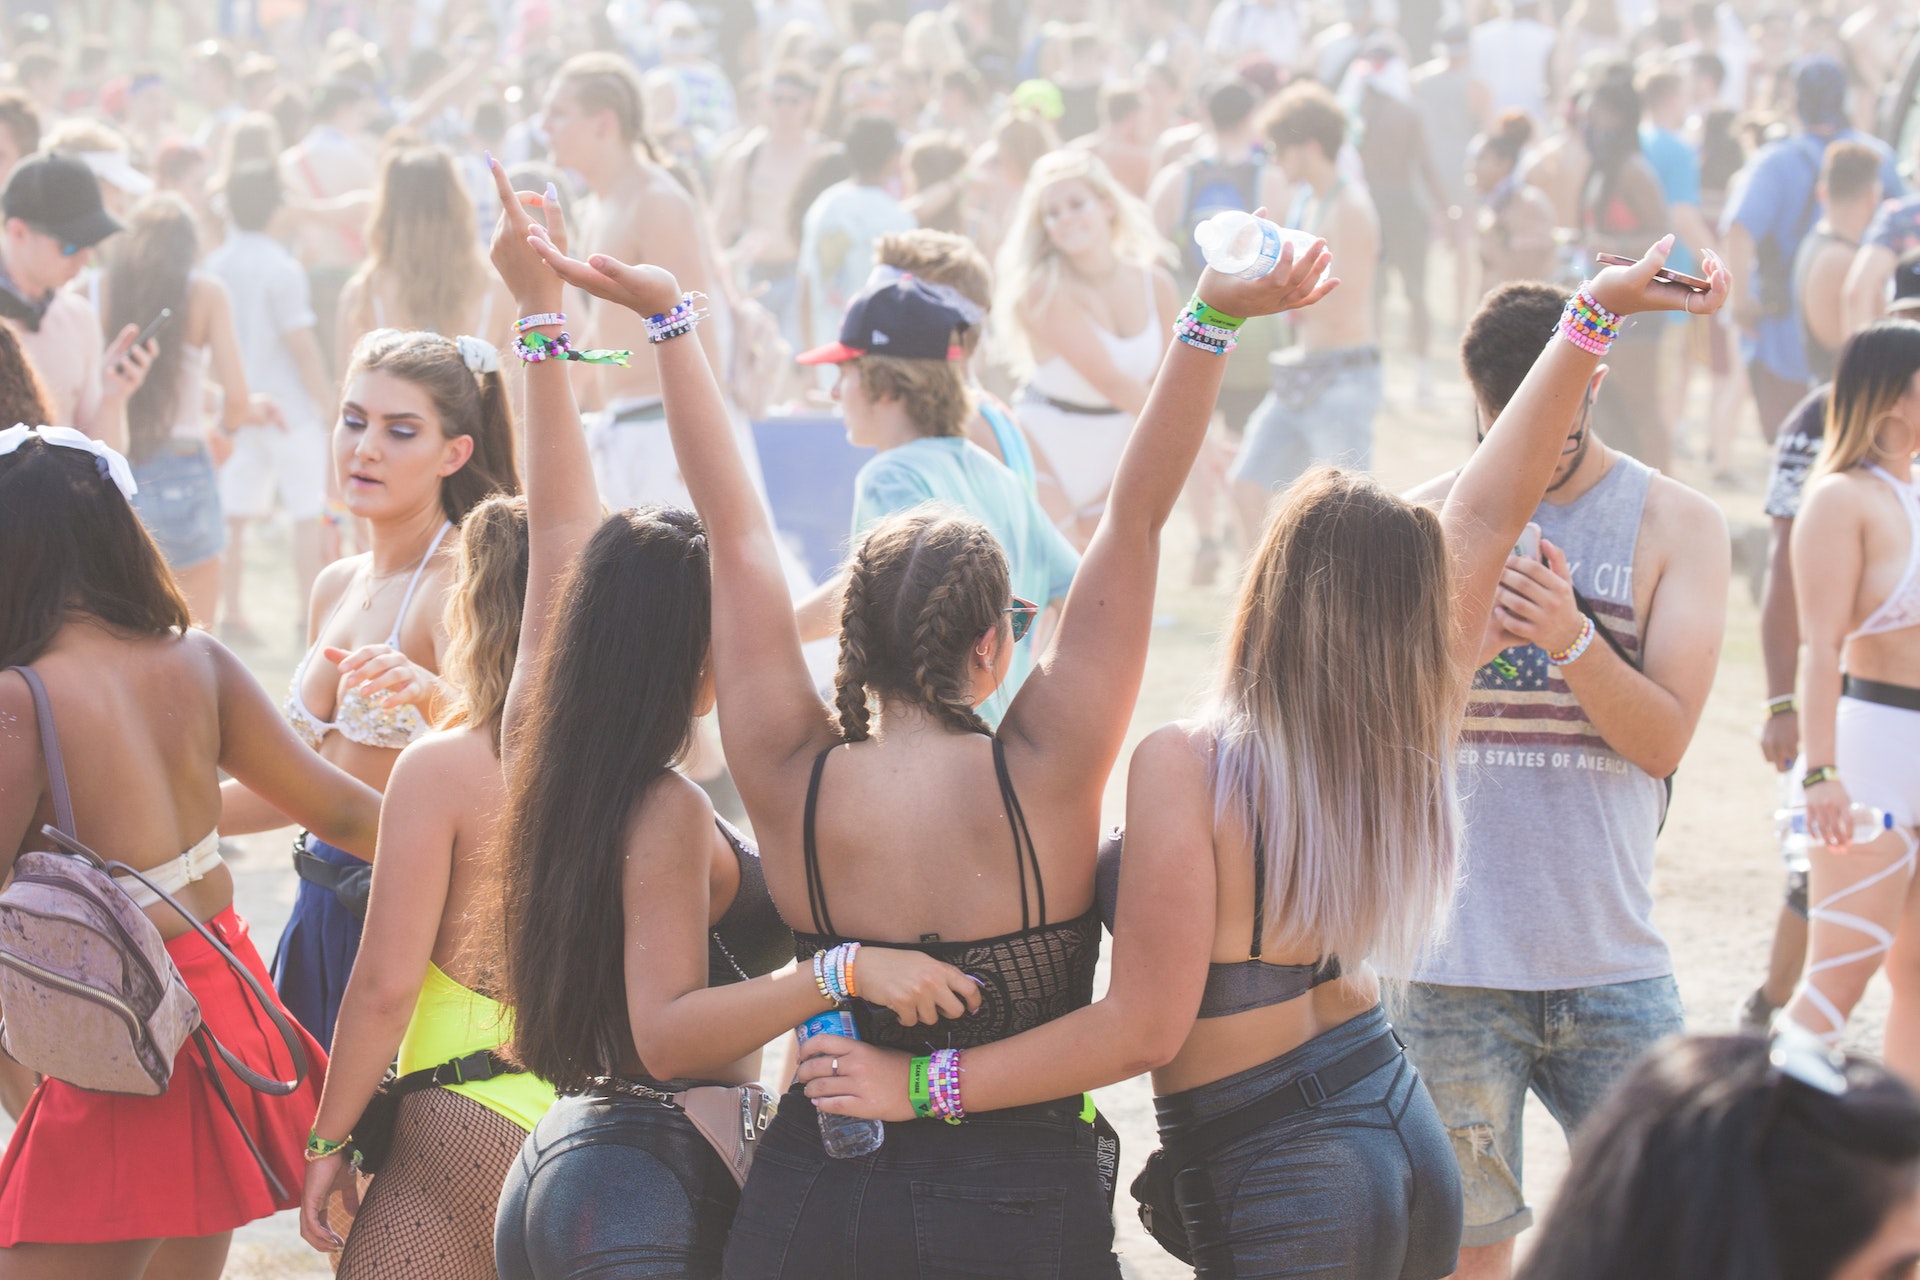 A photo of revelers having a good time at an outdoor music festival